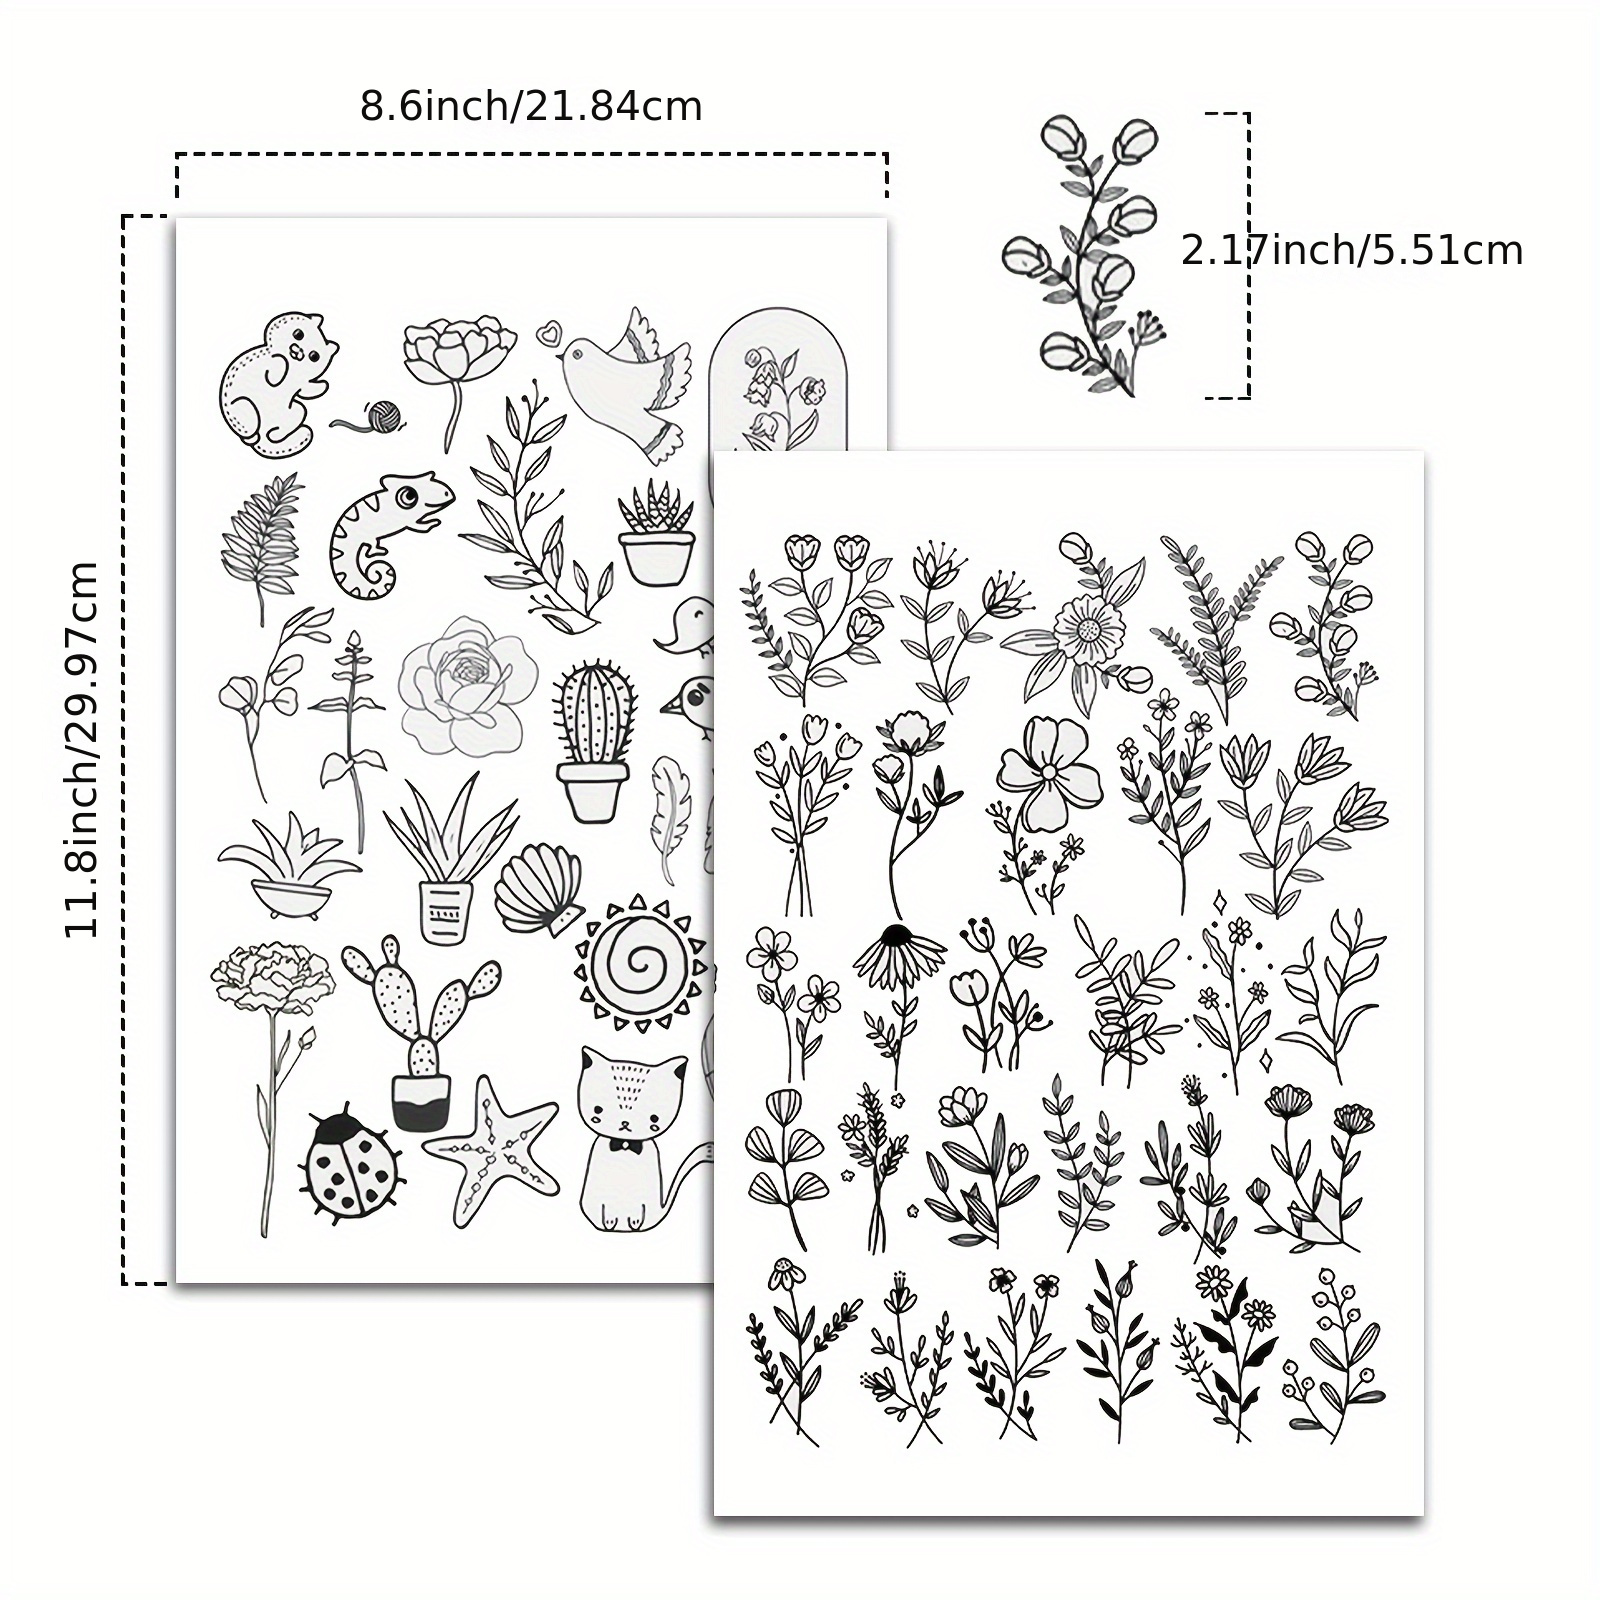 45Pcs Water Soluble Embroidery Stabilizers, Stick and Stitch Embroidery  Designs Paper, Embroidery Transfer Paper Pre-Printed Mushroom Patterns for